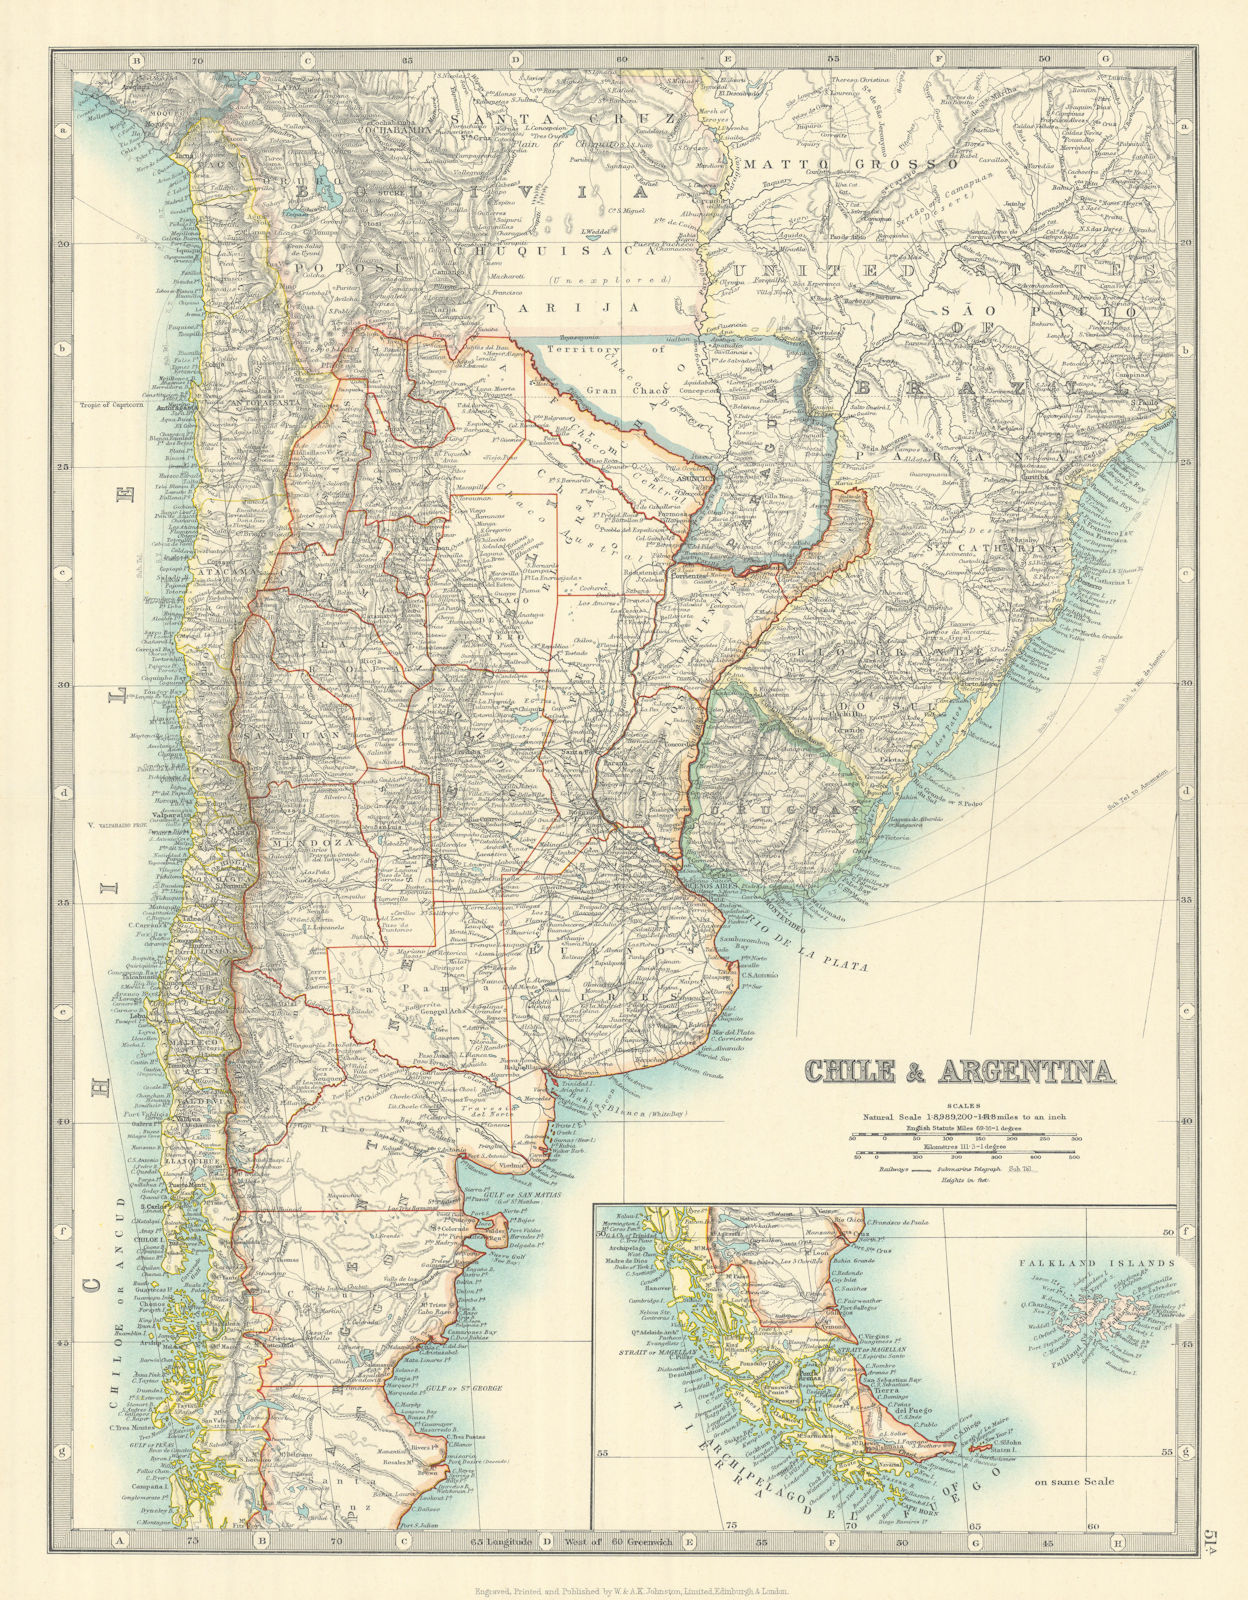 CHILE & ARGENTINA. Paraguay including Gran Chaco. Uruguay. JOHNSTON 1913 map